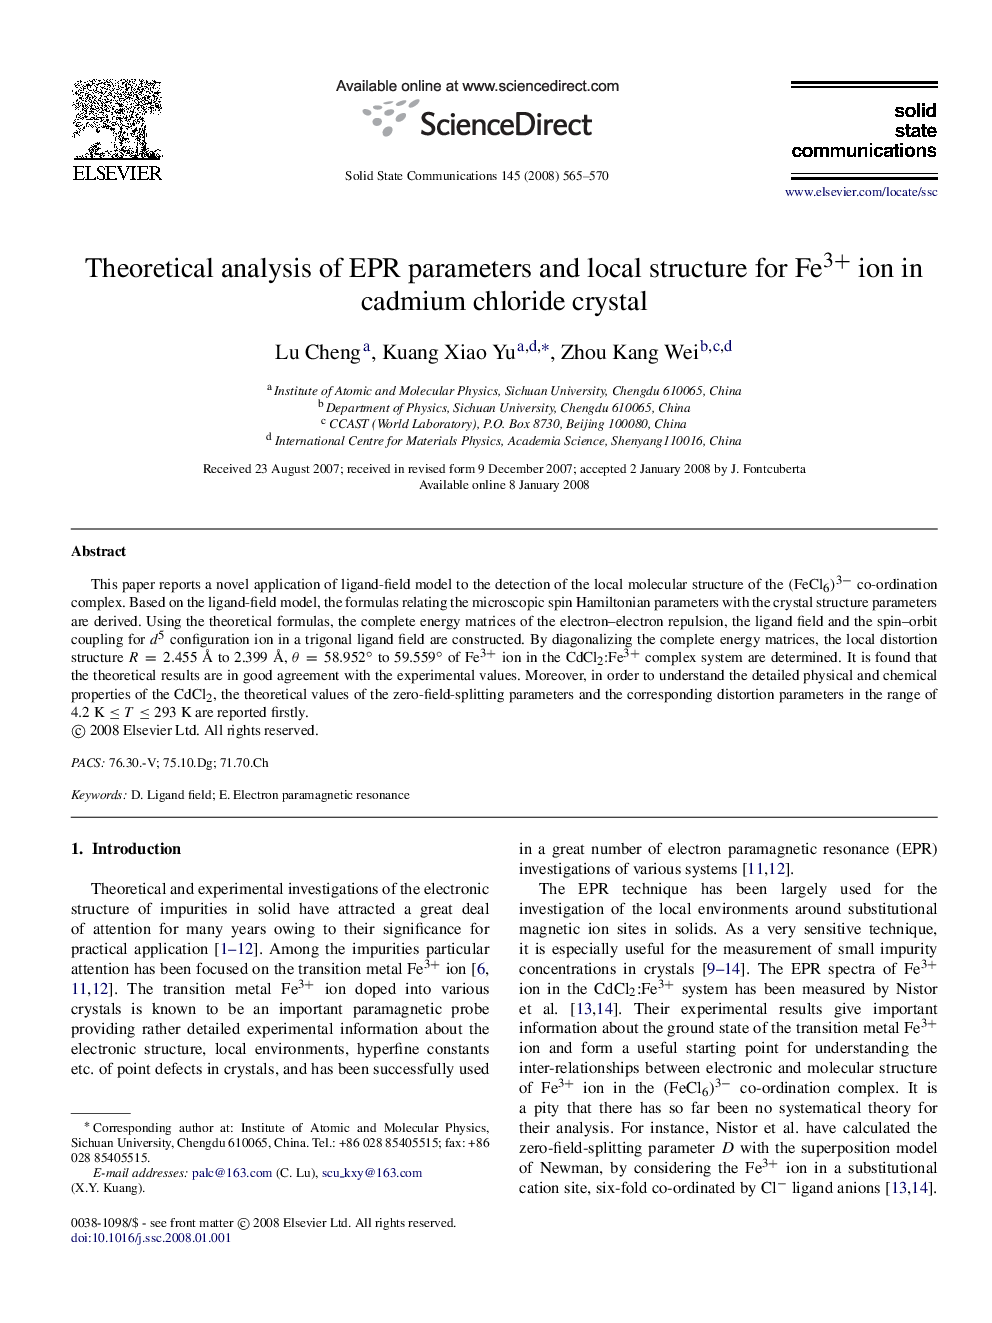 Theoretical analysis of EPR parameters and local structure for Fe3+ ion in cadmium chloride crystal